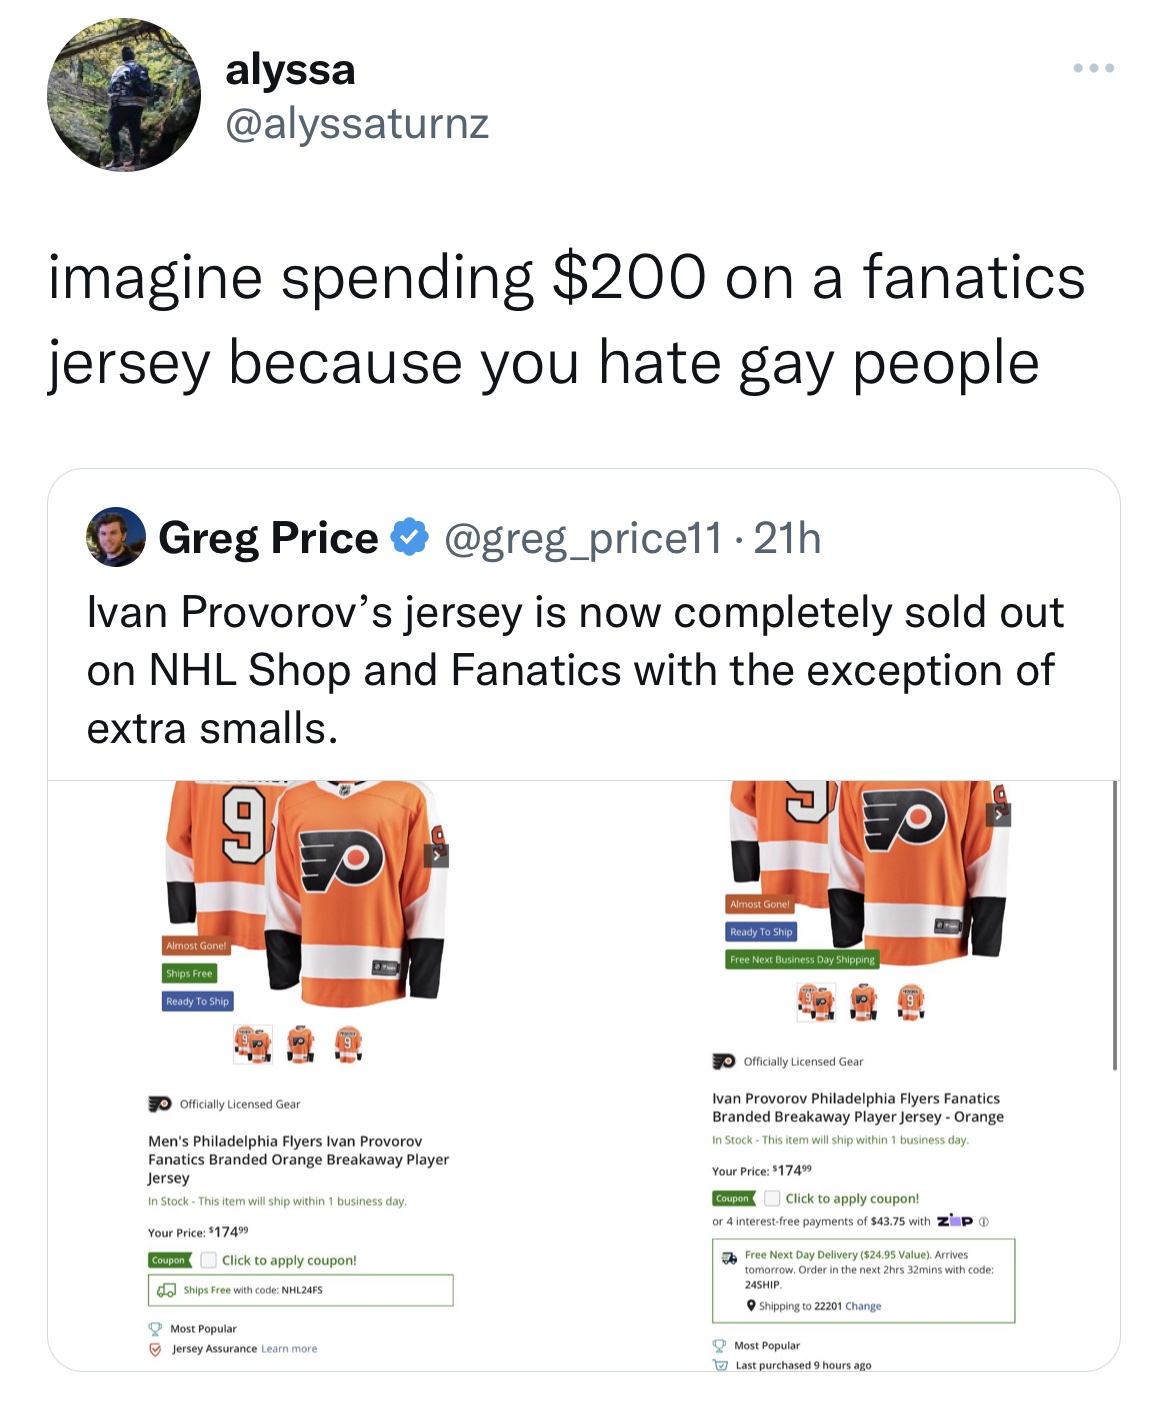 Tweets Dunking on Celebs - web page - alyssa imagine spending $200 on a fanatics jersey because you hate gay people Greg Price .21h Ivan Provorov's jersey is now completely sold out on Nhl Shop and Fanatics with the exception of extra smalls. 9 Almost Gon